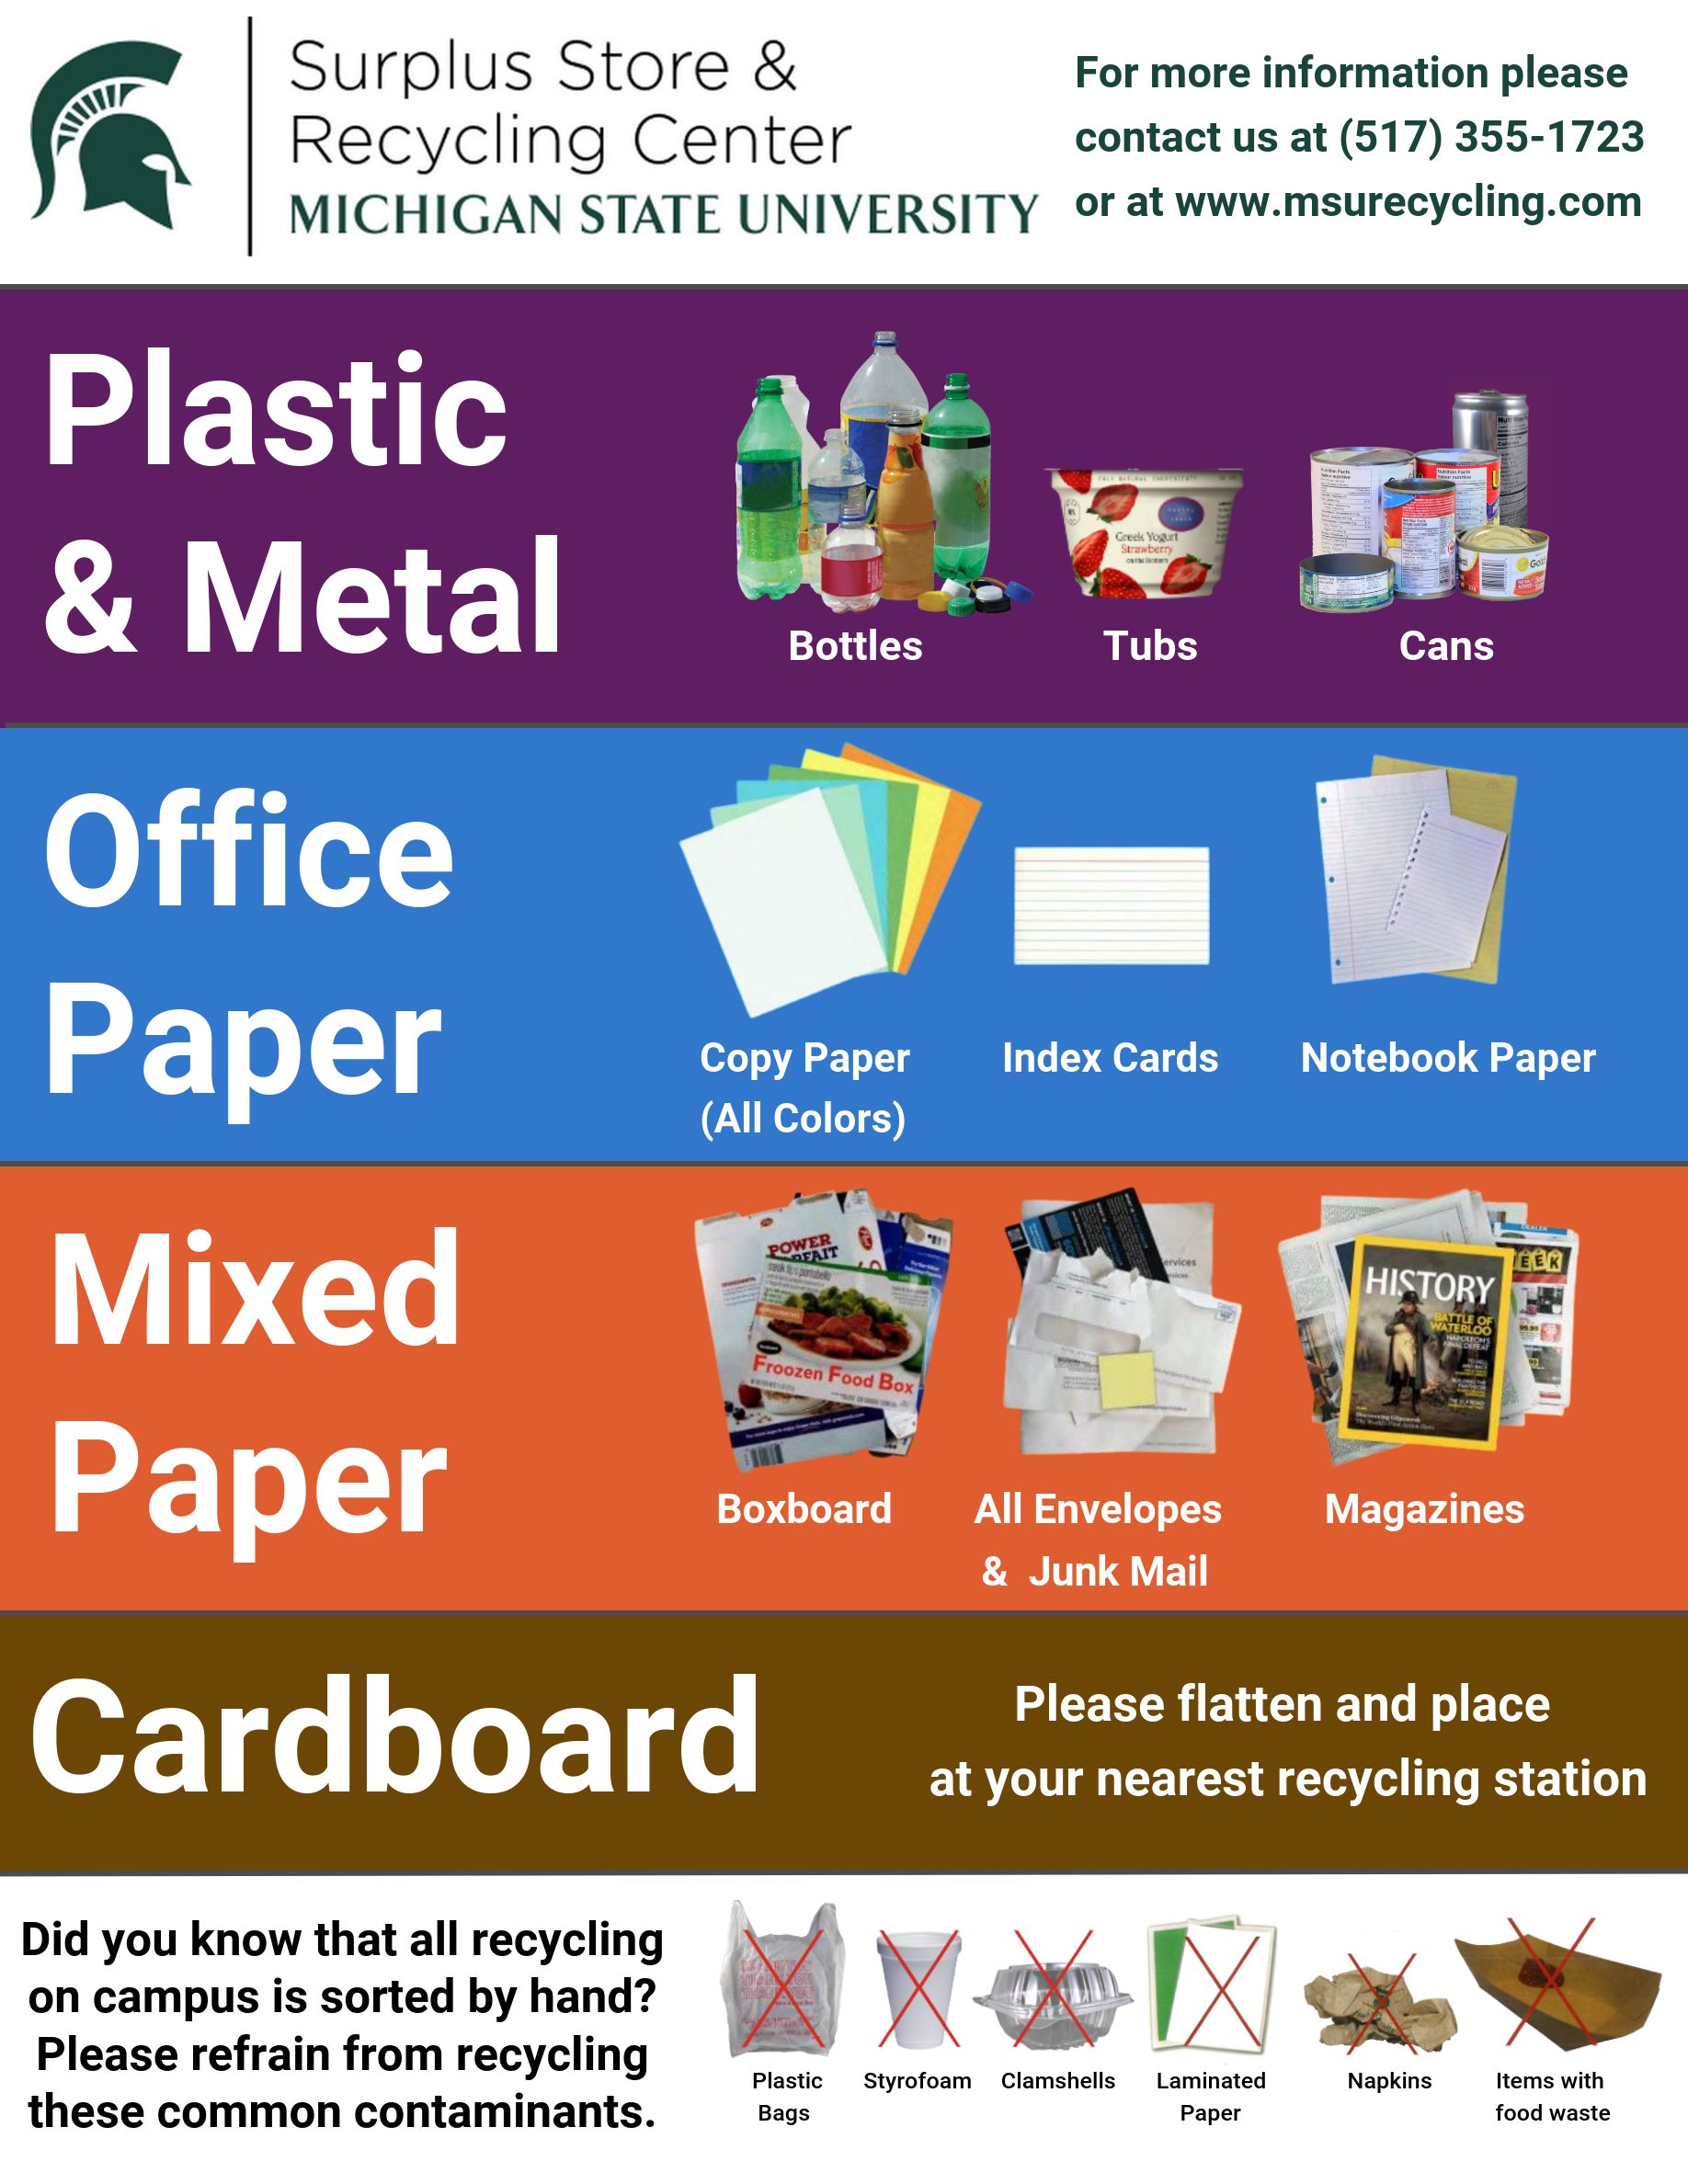 Surplus Store and Recycling Center Michigan State University For more information please contact us at (517) 355-1723 or at www.msurecycling.com Campus Recycling Guide – Materials Accepted. Plastic and Metal – bottles, tubs, cans. Office Paper – copy paper (all colors), index cards, notebook paper. Mixed paper – boxboard, all envelopes and junk mail, magazines. Cardboard – please flatten and place at your nearest recycling station. Did you know that all recycling on campus is sorted by hand? Please refrain from recycling these common contaminants – plastic bags, Styrofoam, clamshells, laminated paper, napkins, items with food waste. 